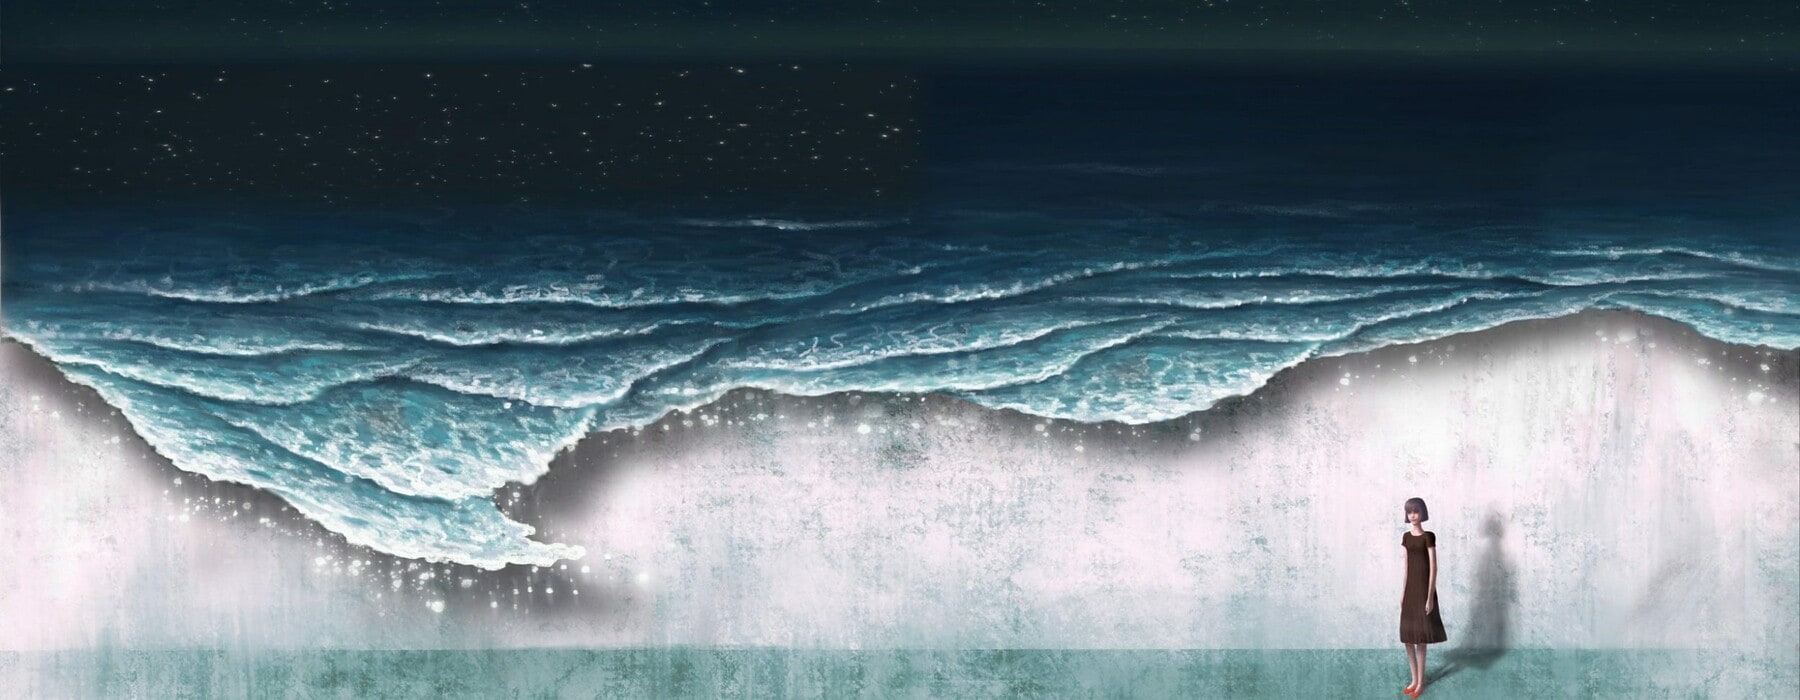 An illustrator of woman walking along a beach with waves coming to shore and stars in the night sky